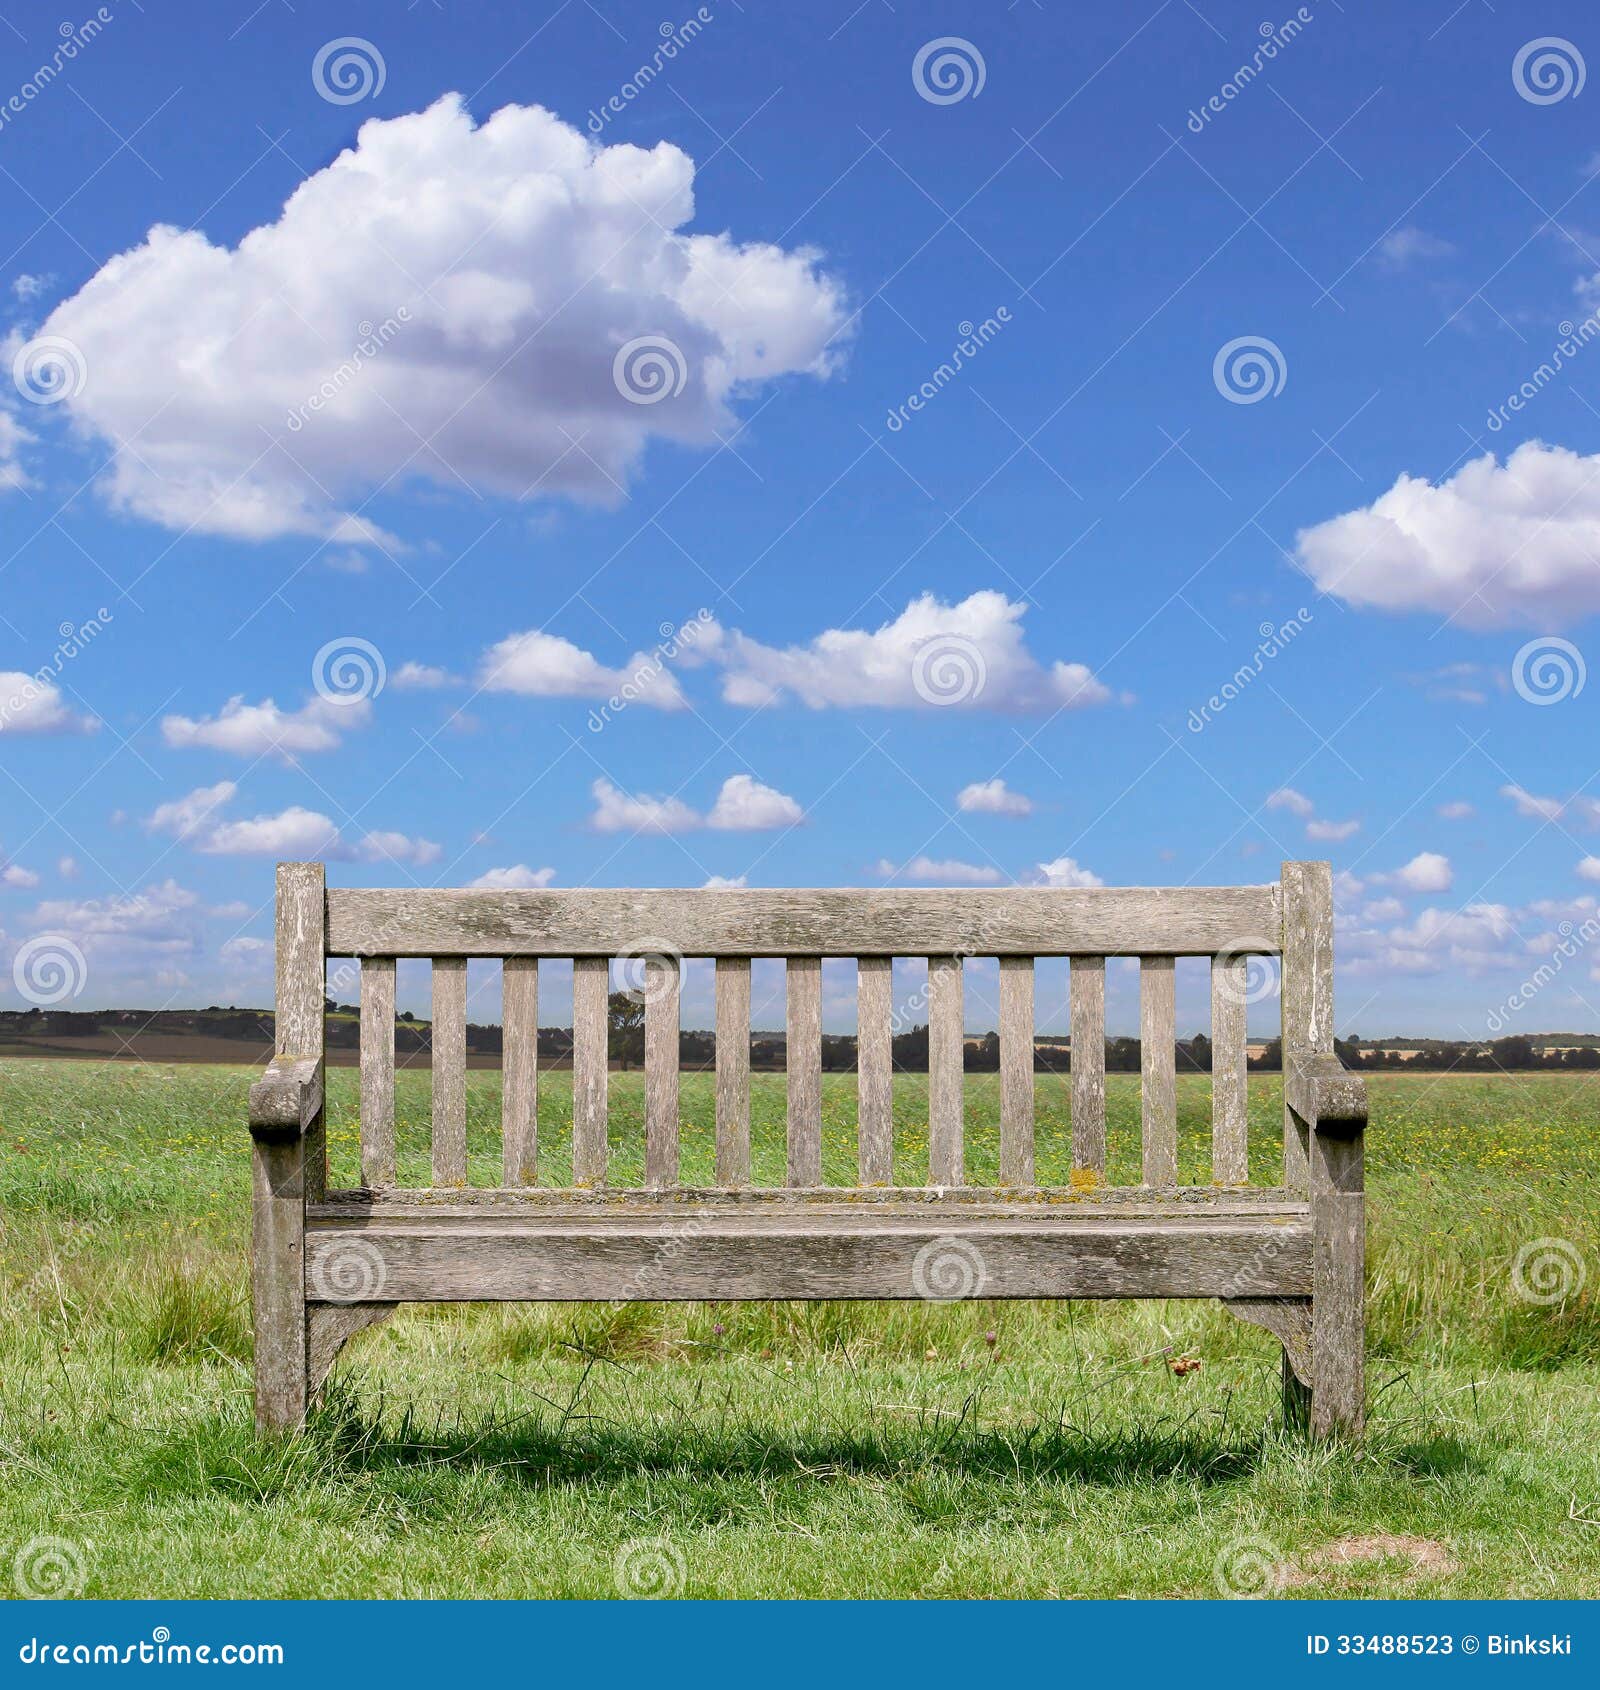 Wooden Park Bench with Grass and Blue Sky.